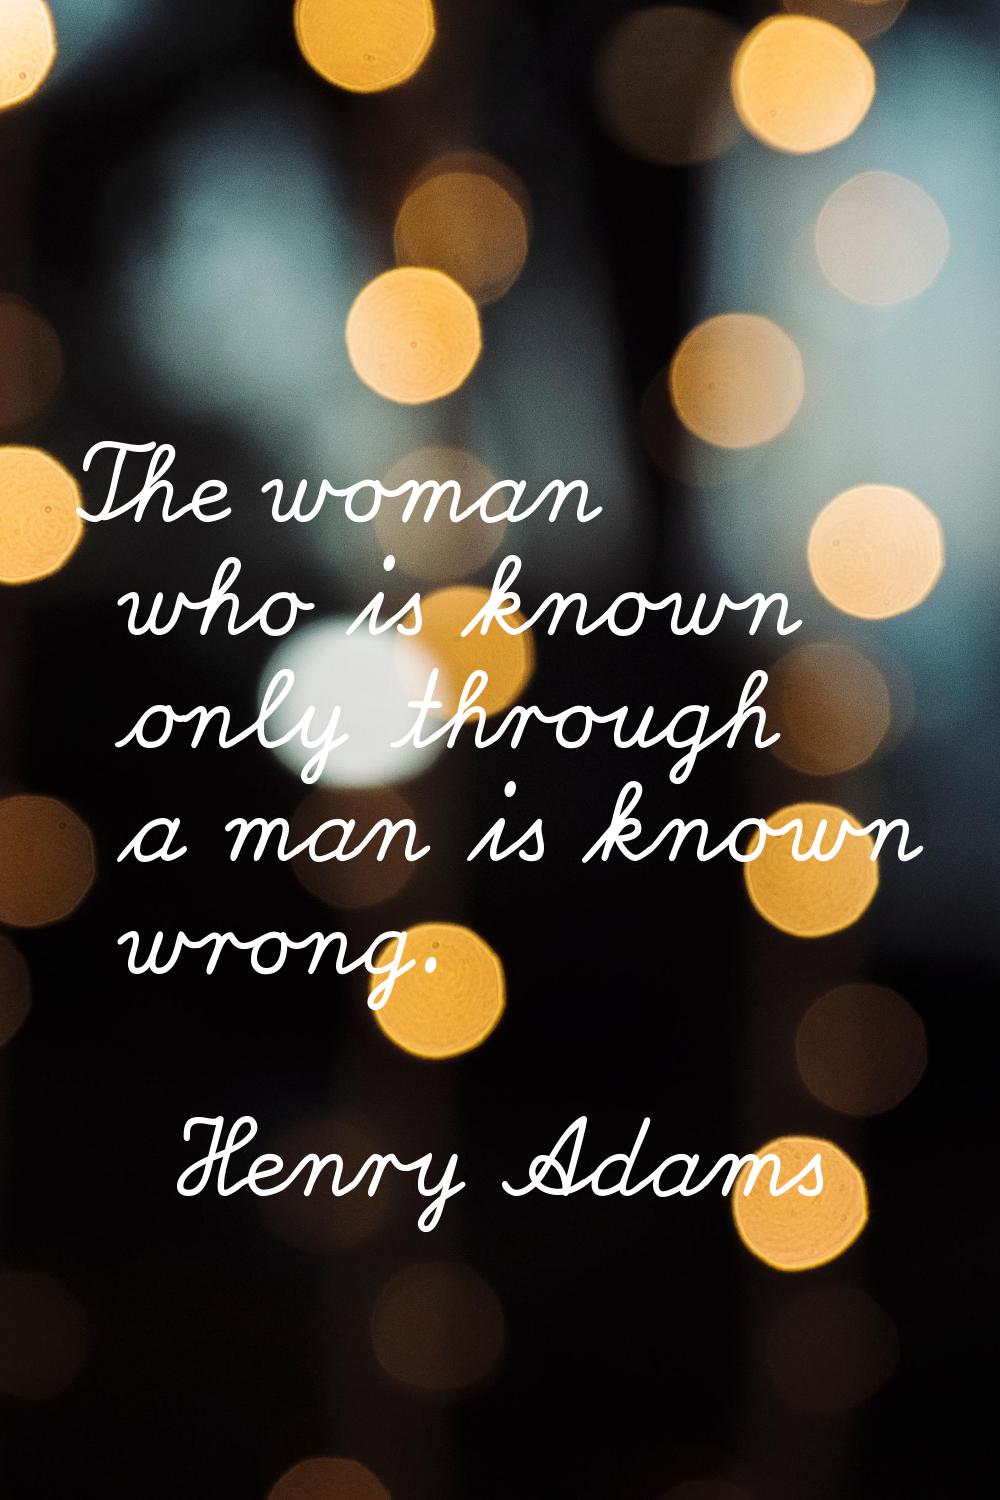 The woman who is known only through a man is known wrong.